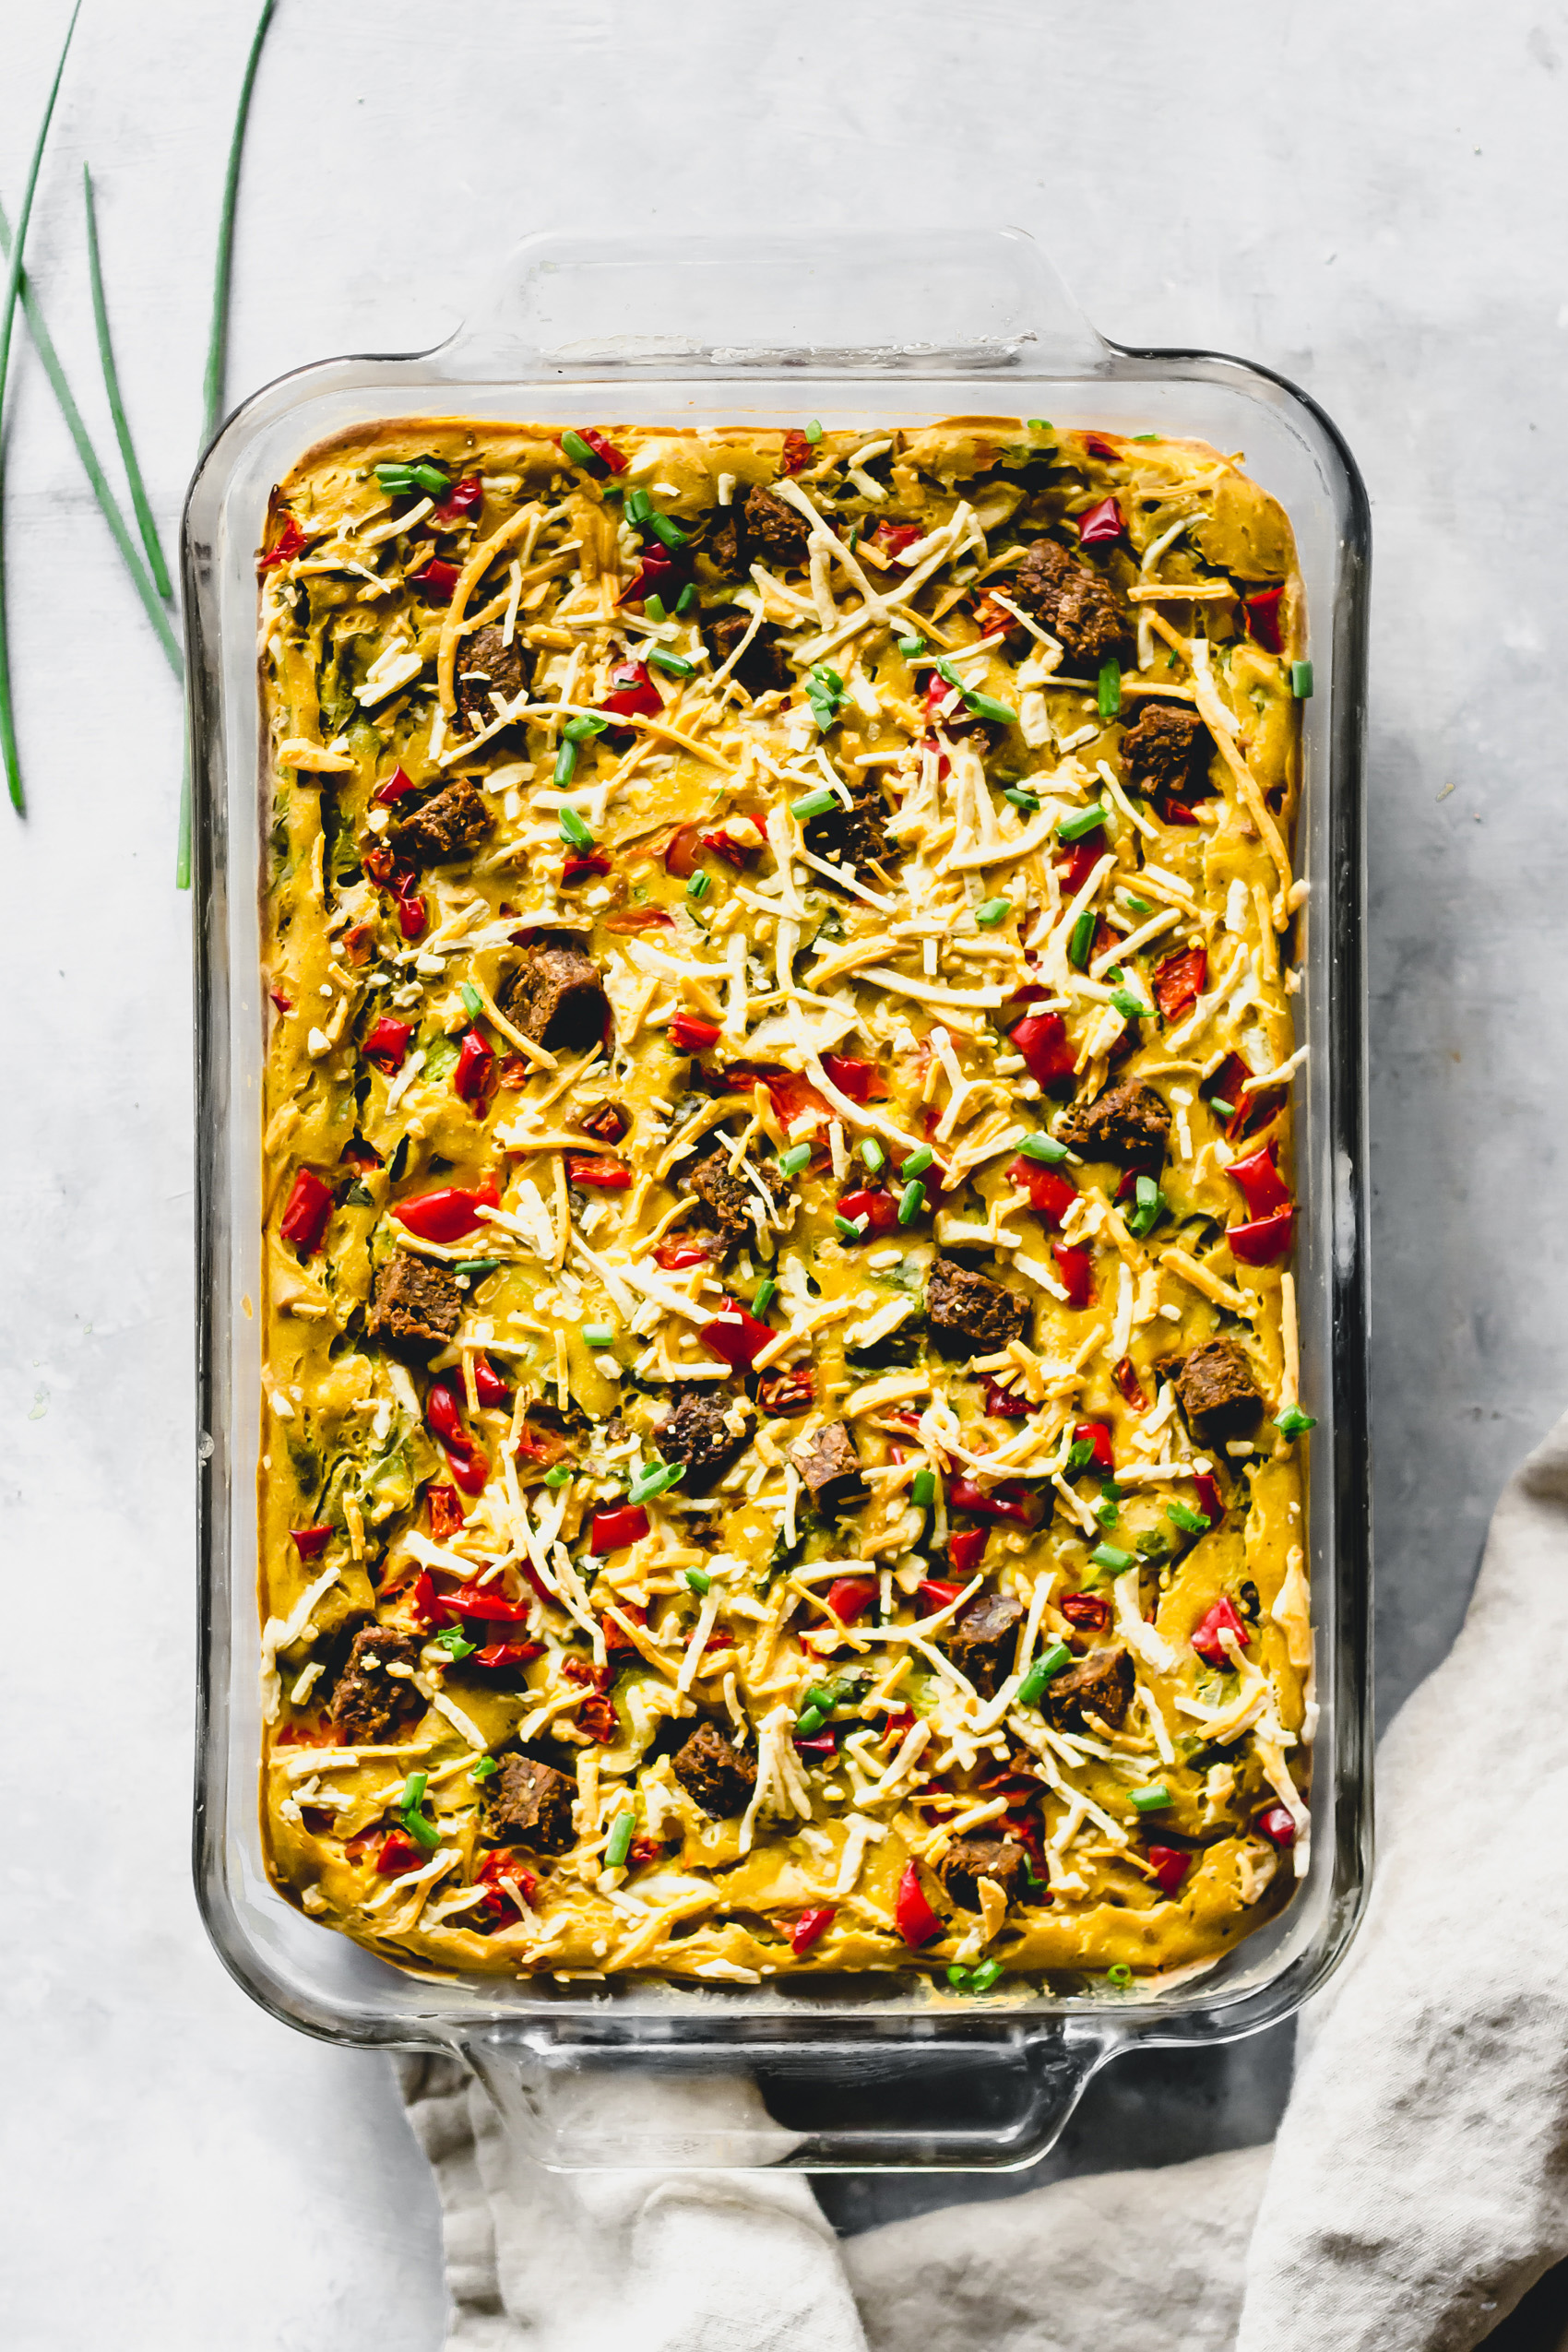 a casserole dish filled with a vegan egg and veggie bake